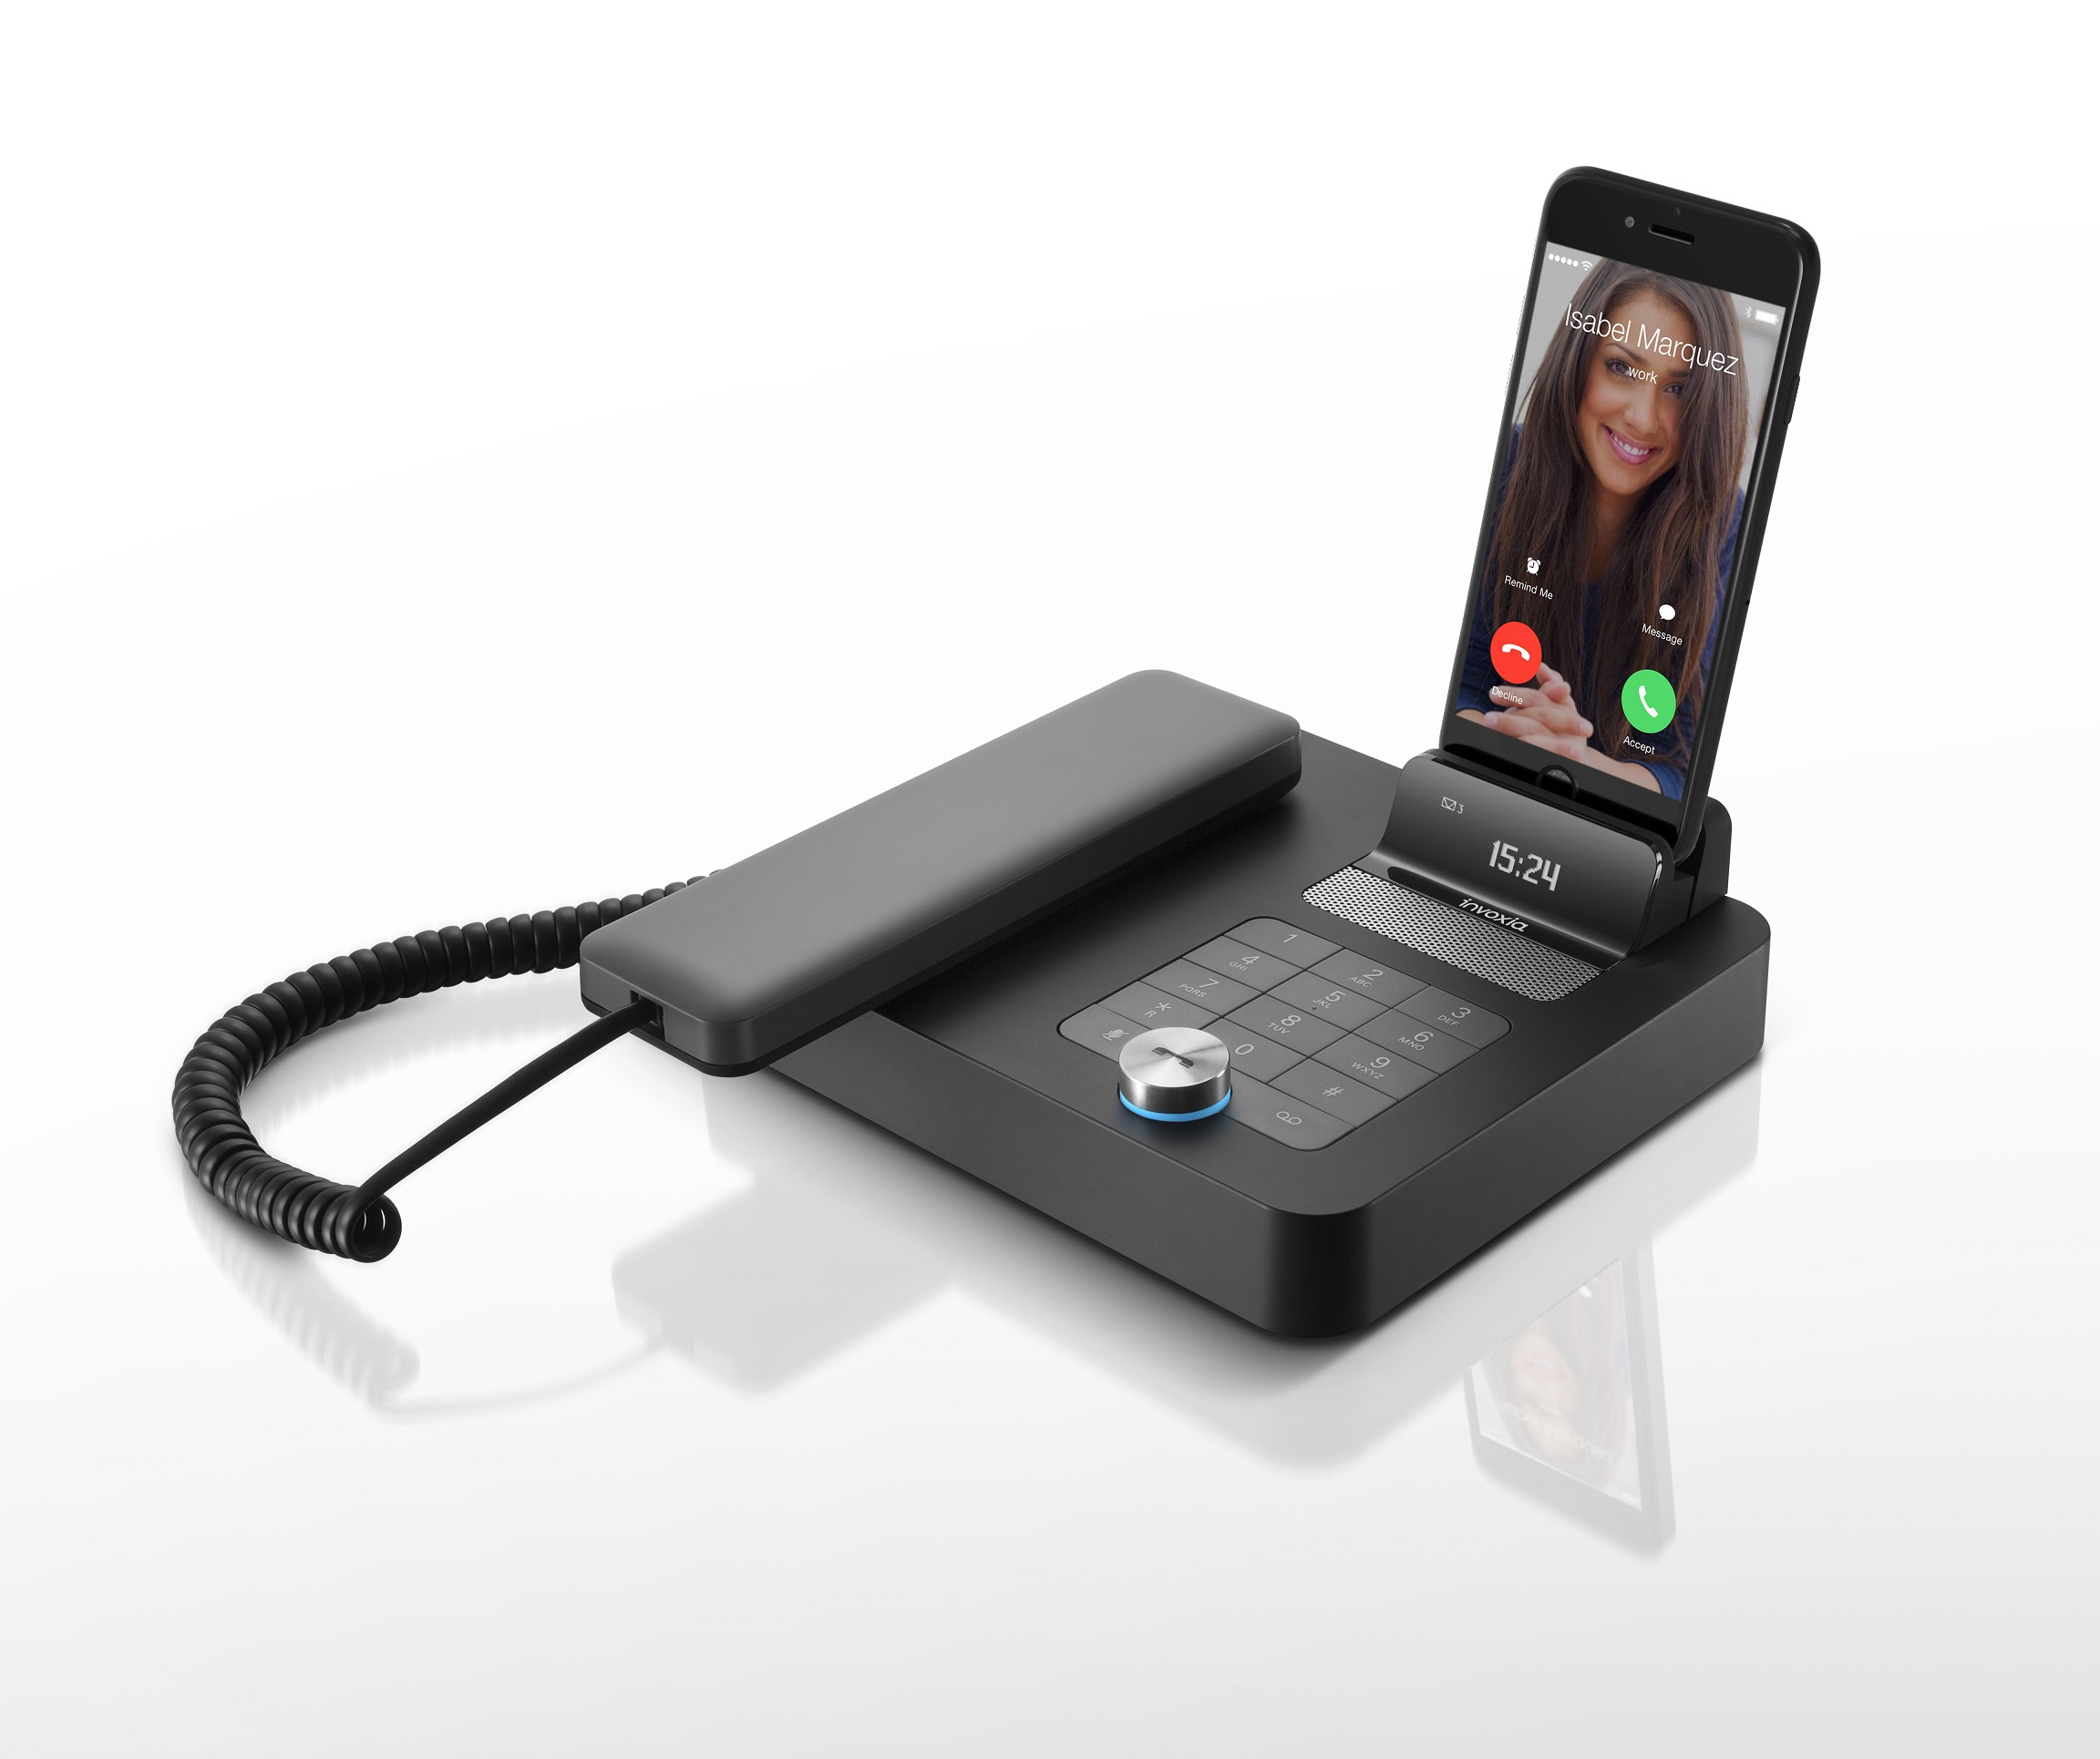 Turn Your Mobile Phone Into A Desk Phone The Nvx 200